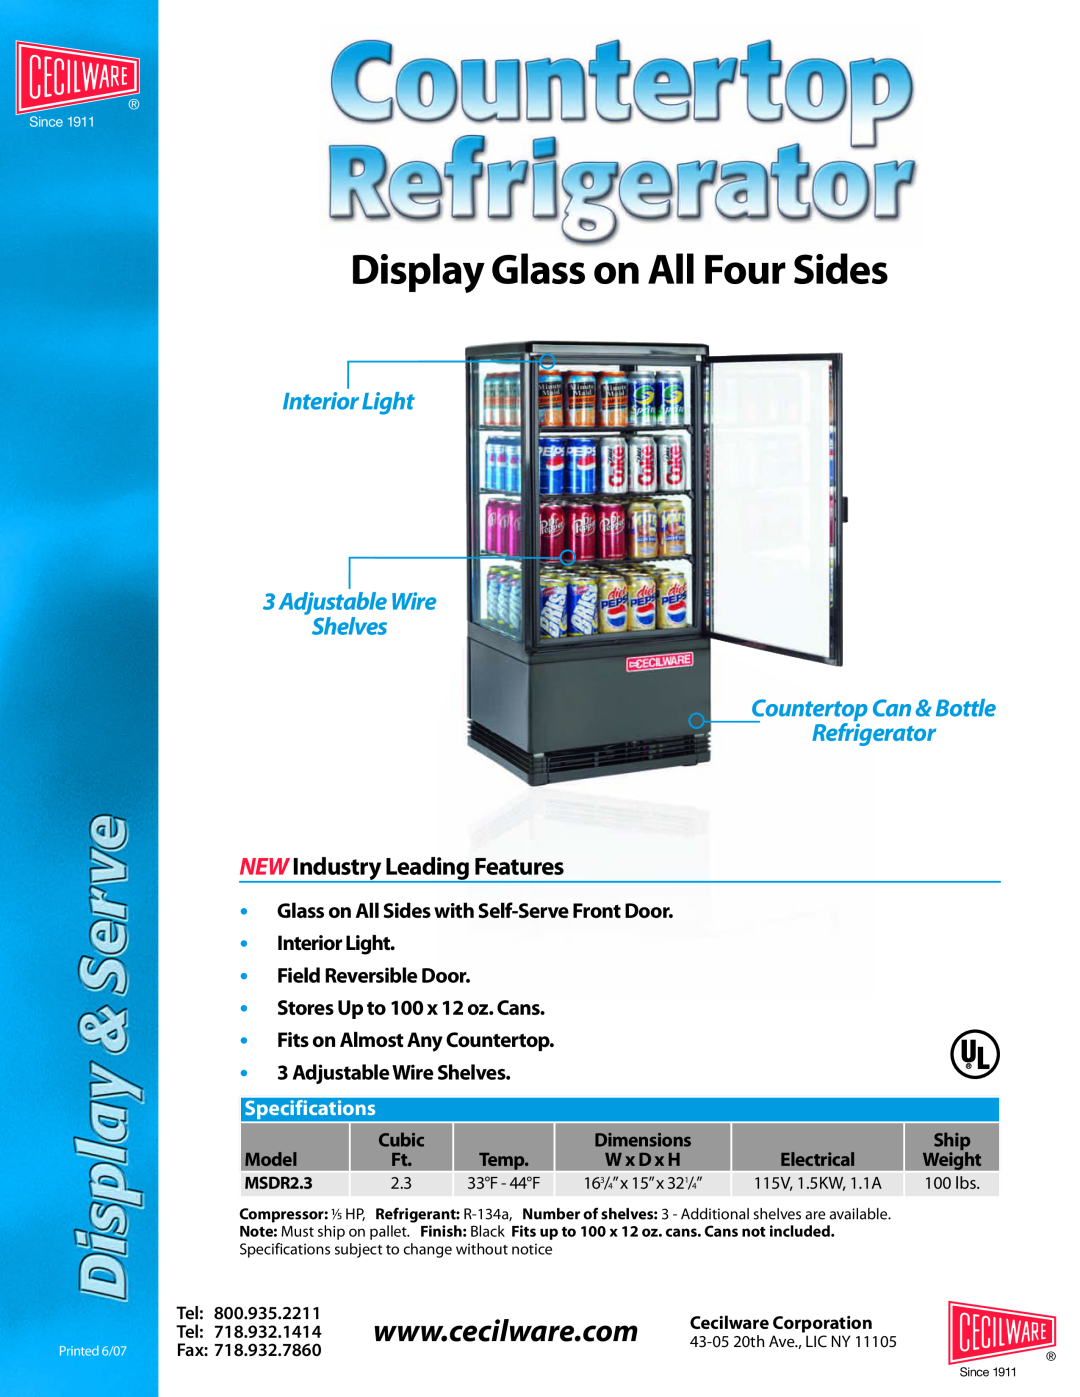 Cecilware MSDR2.3 specifications Display Glass on All Four Sides, Interior Light 3AdjustableWire Shelves, Specifications 